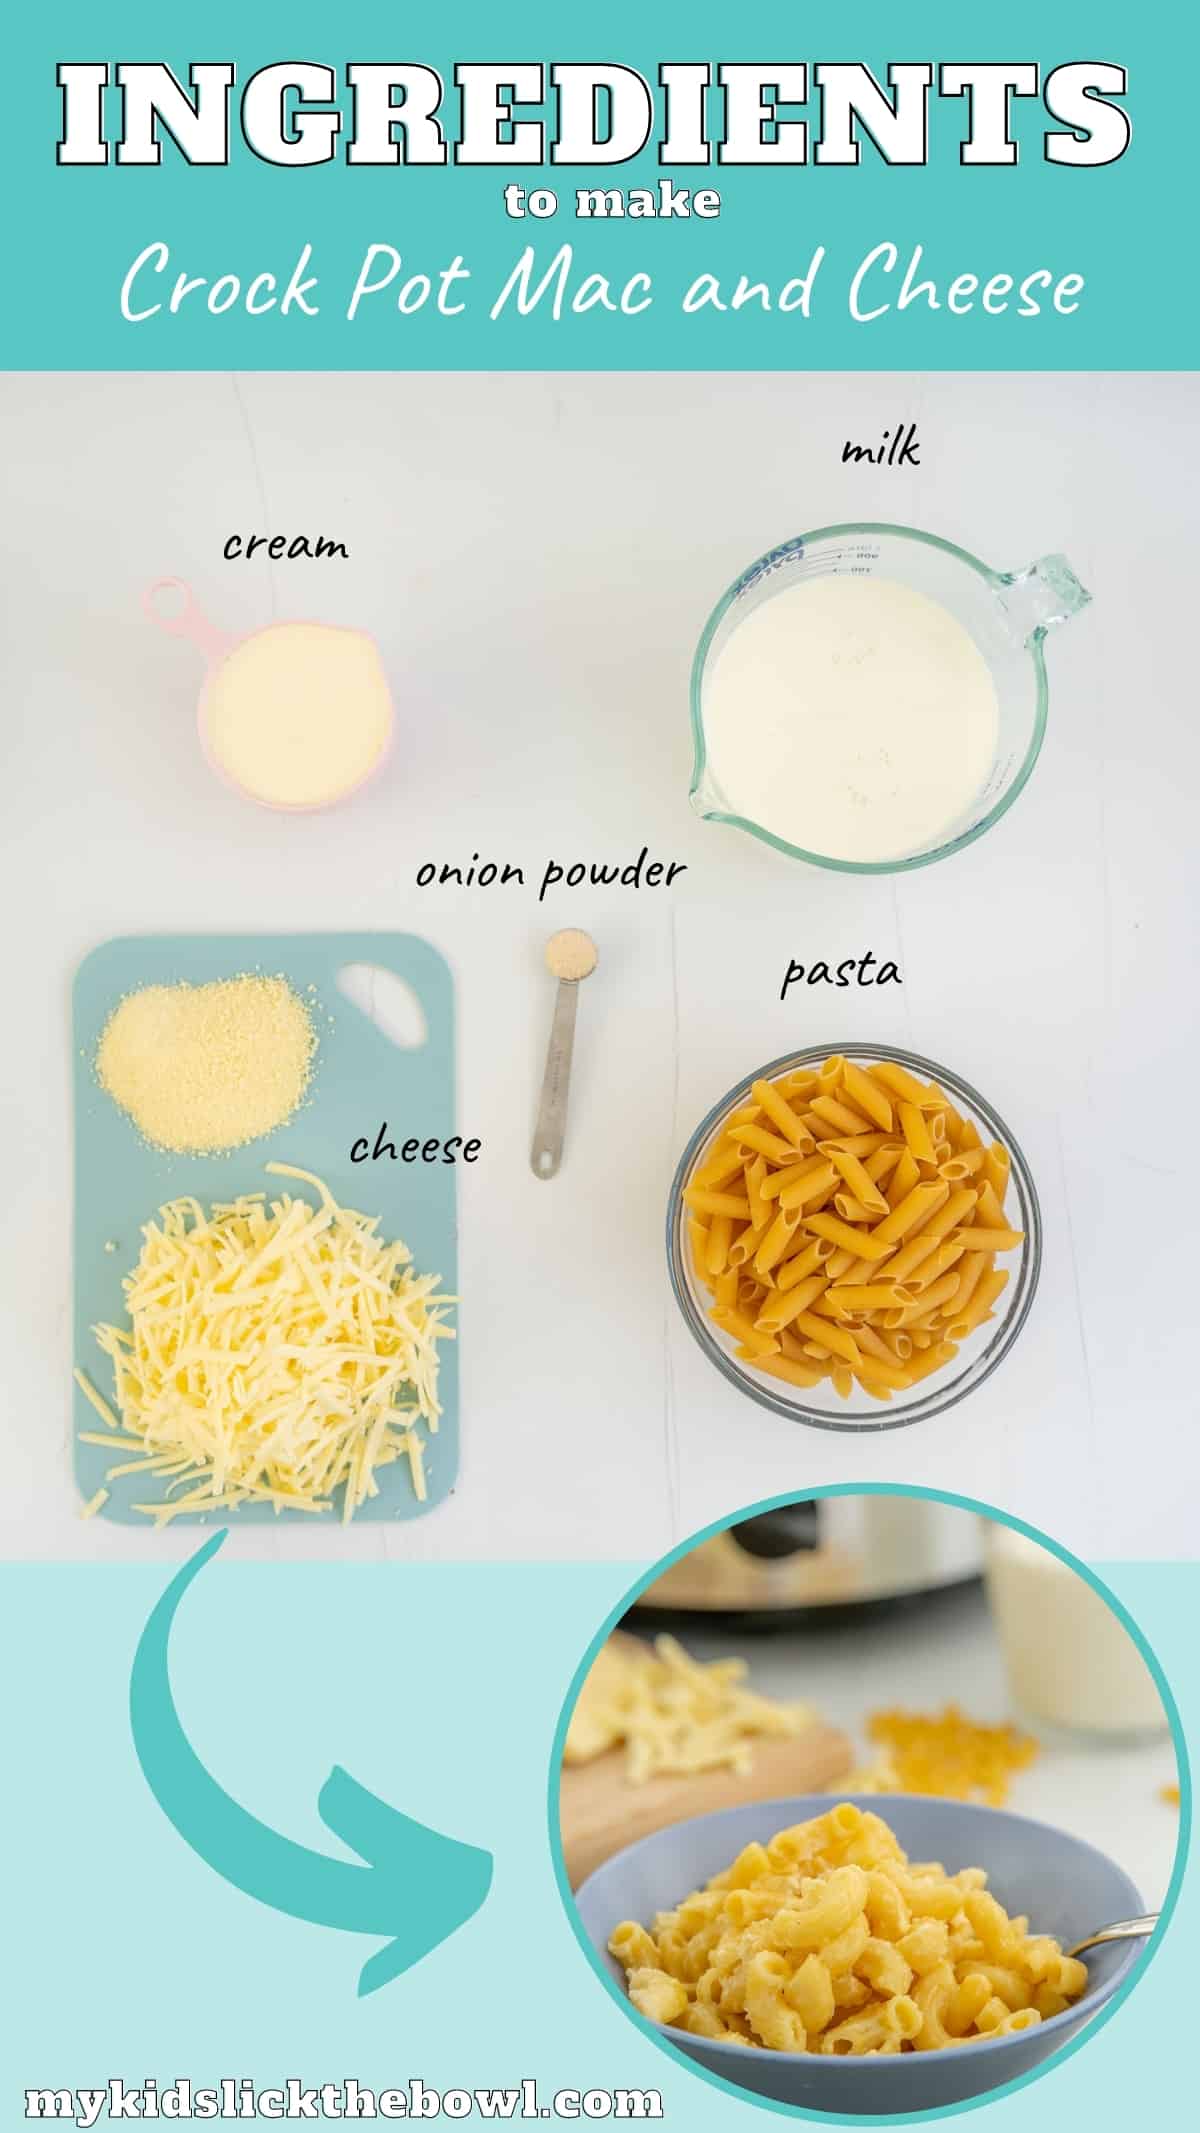 The ingredients to make crock pot mac and cheese laid out on a bench top with text overlay.